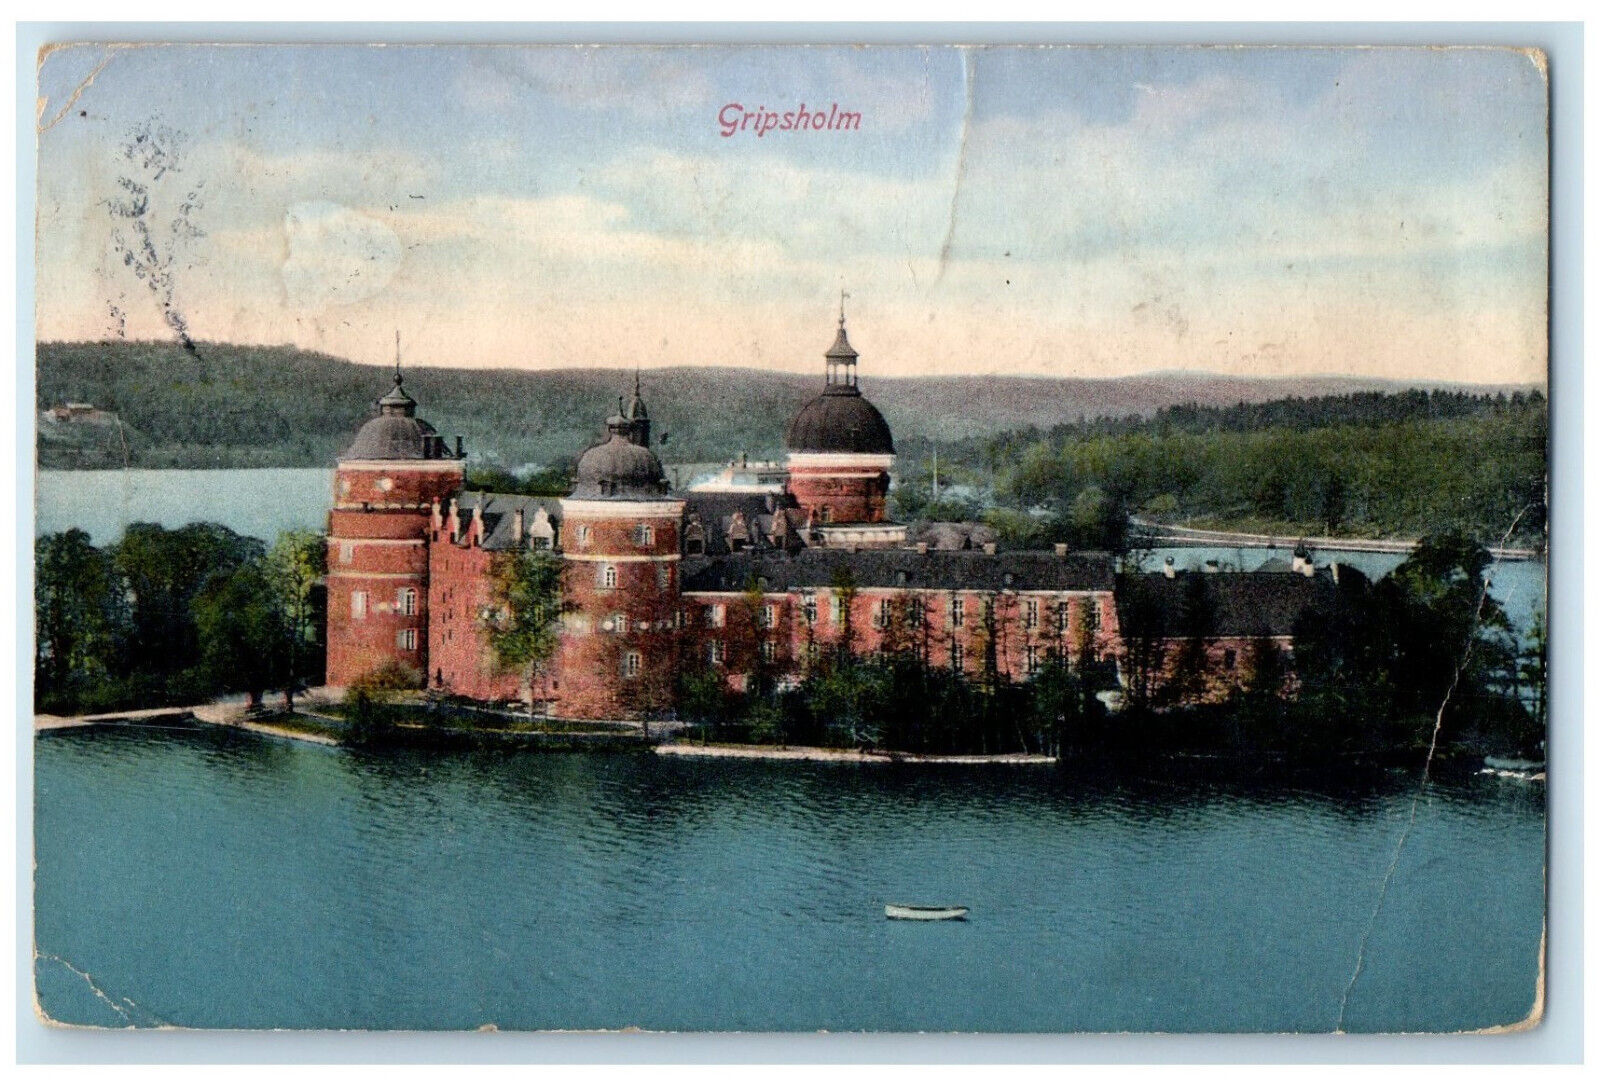 1912 View of Gripsholm Castle in Mariefred Sweden Antique Posted Postcard